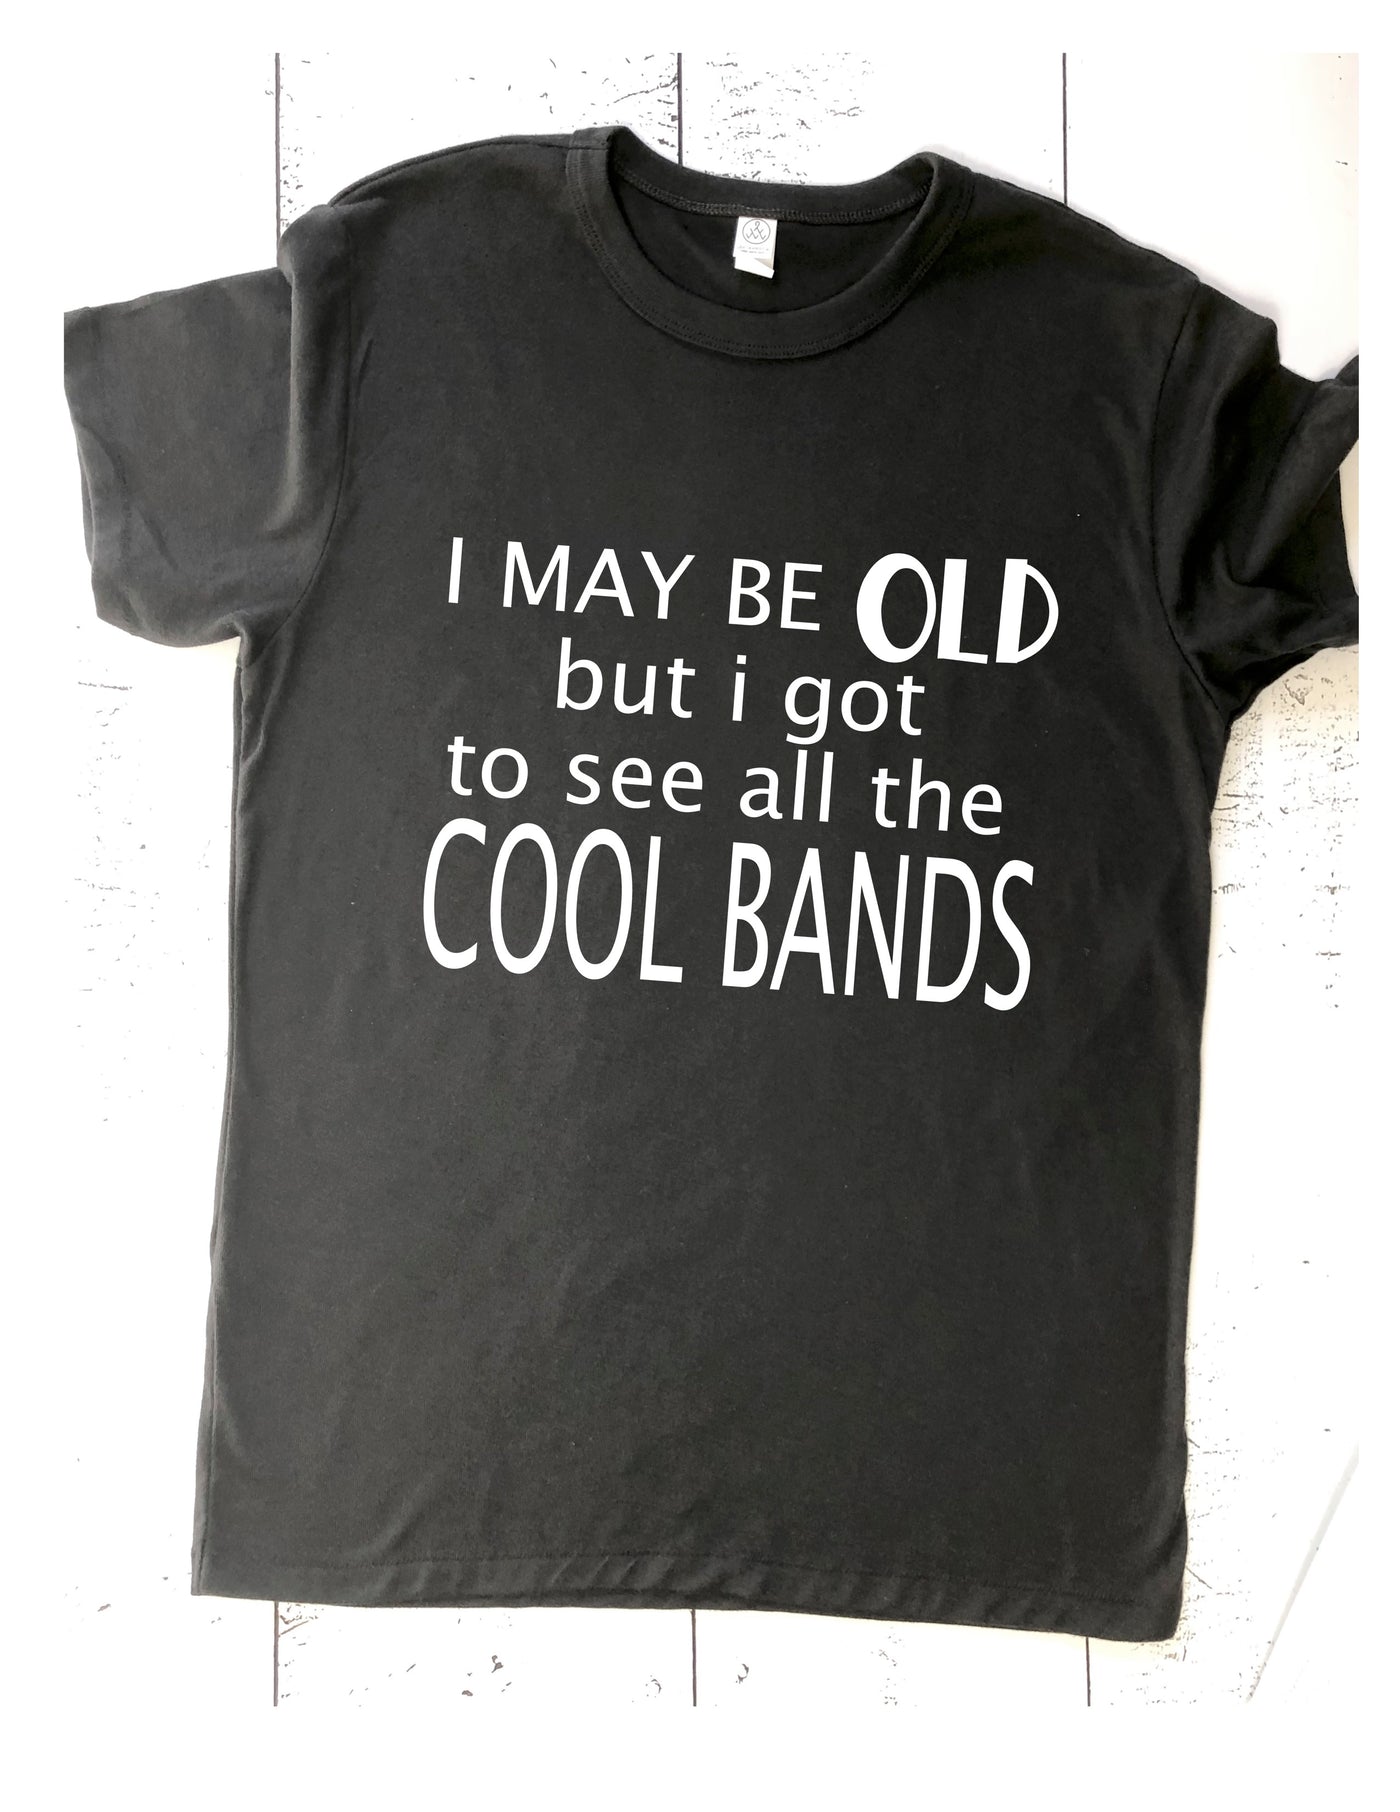 i got to see all the cool bands - unisex tee shirt